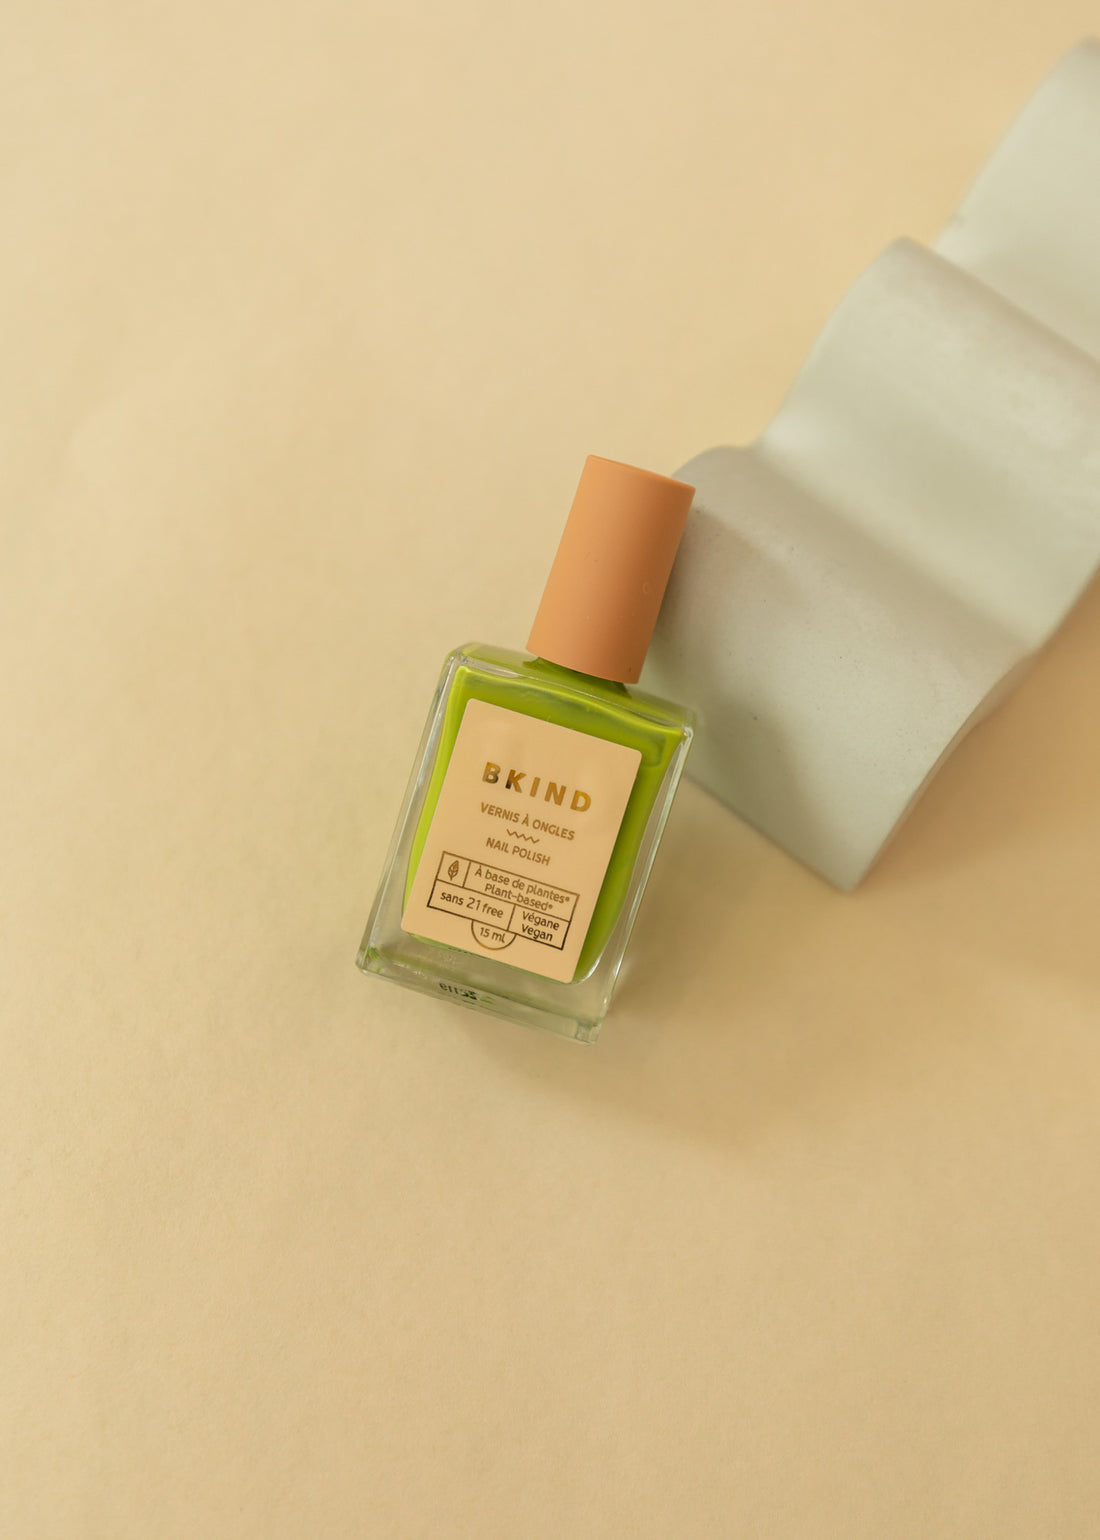 Flatlay of a nail polish bottle leaning on a white ceramic. Color of nail polish is lime green called "mojito"